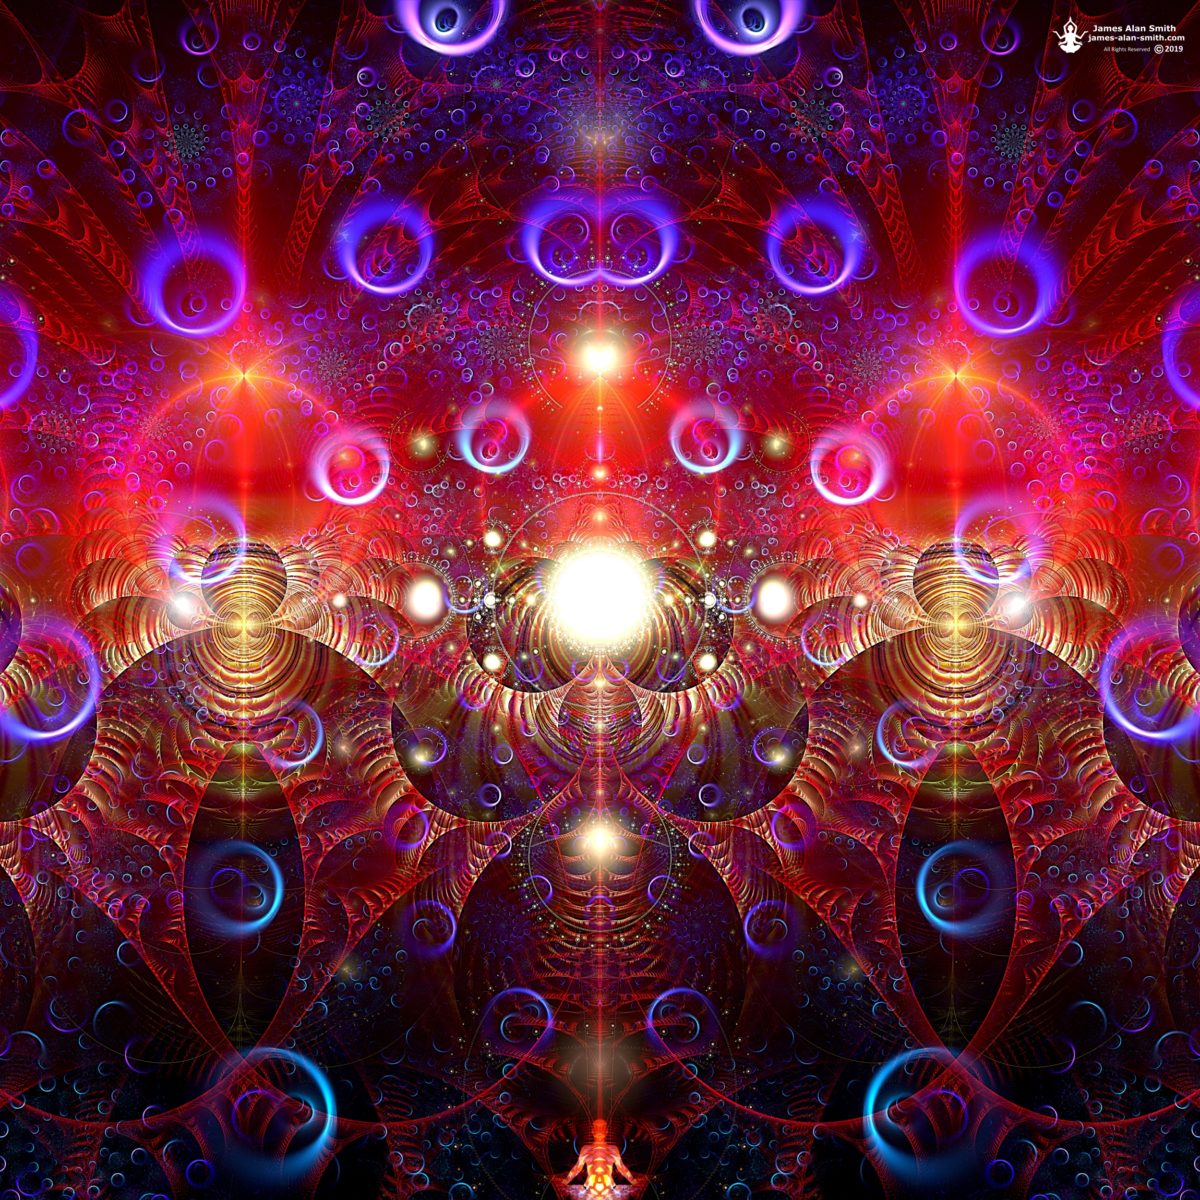 Pathways to Enlightenment: Artwork by James Alan Smith